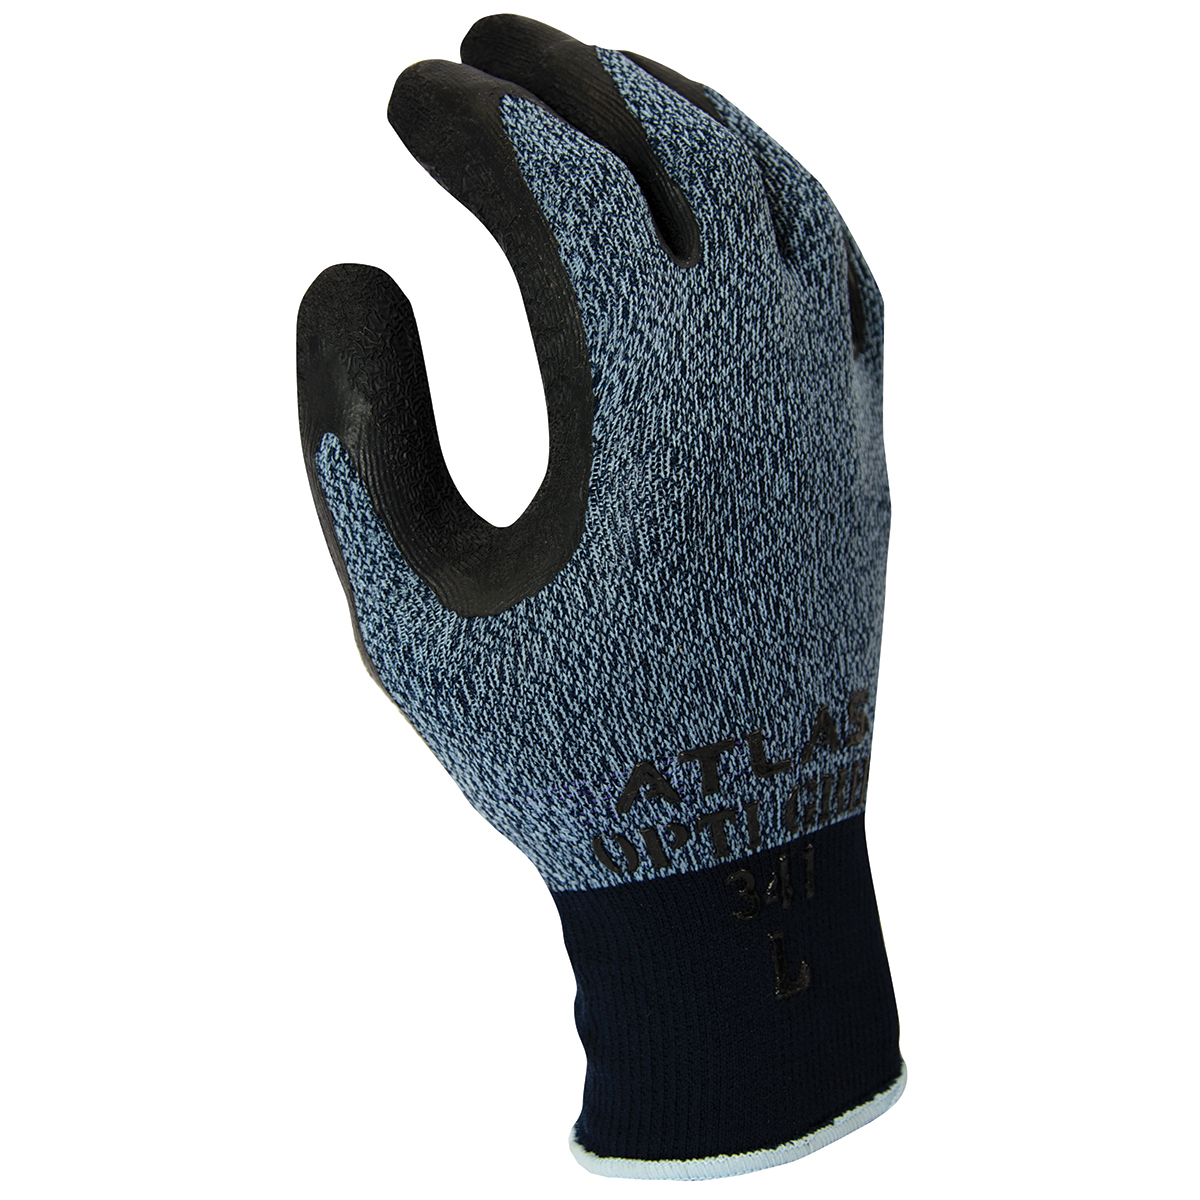 SHOWA® Size 9 ATLAS® 13 Gauge Natural Rubber Palm Coated Work Gloves With Nylon And Polyester Liner And Knit Wrist